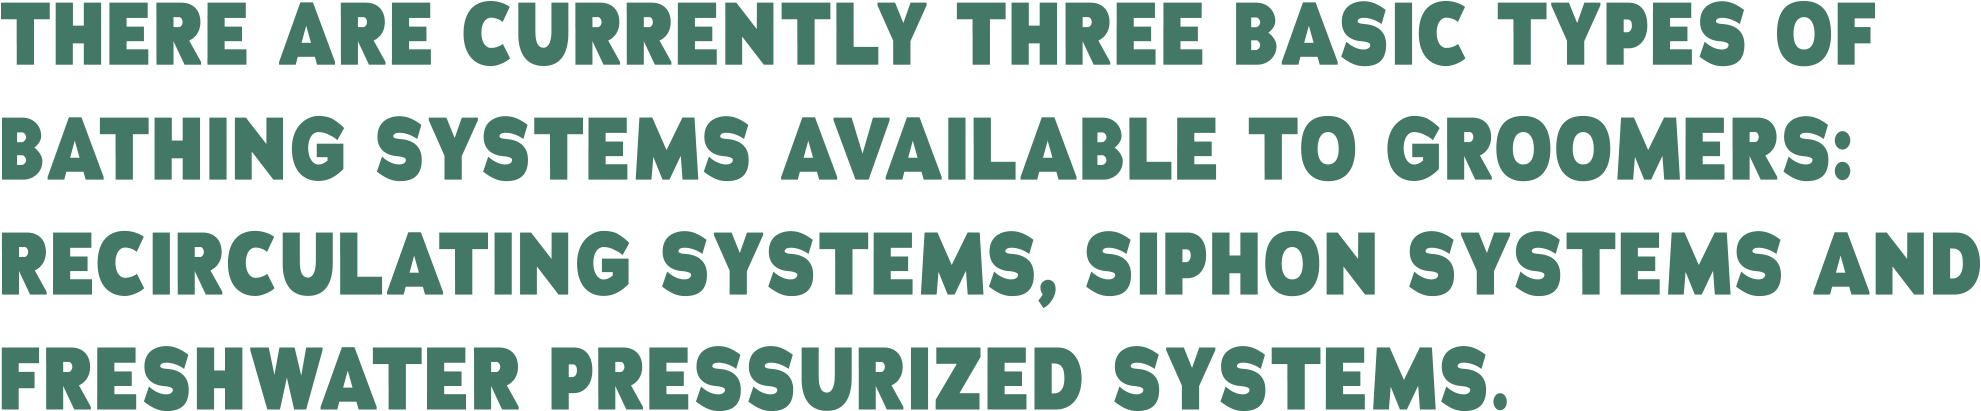 There are currently three basic types of bathing systems available to groomers: recirculating systems, siphon systems and freshwater pressurized systems.